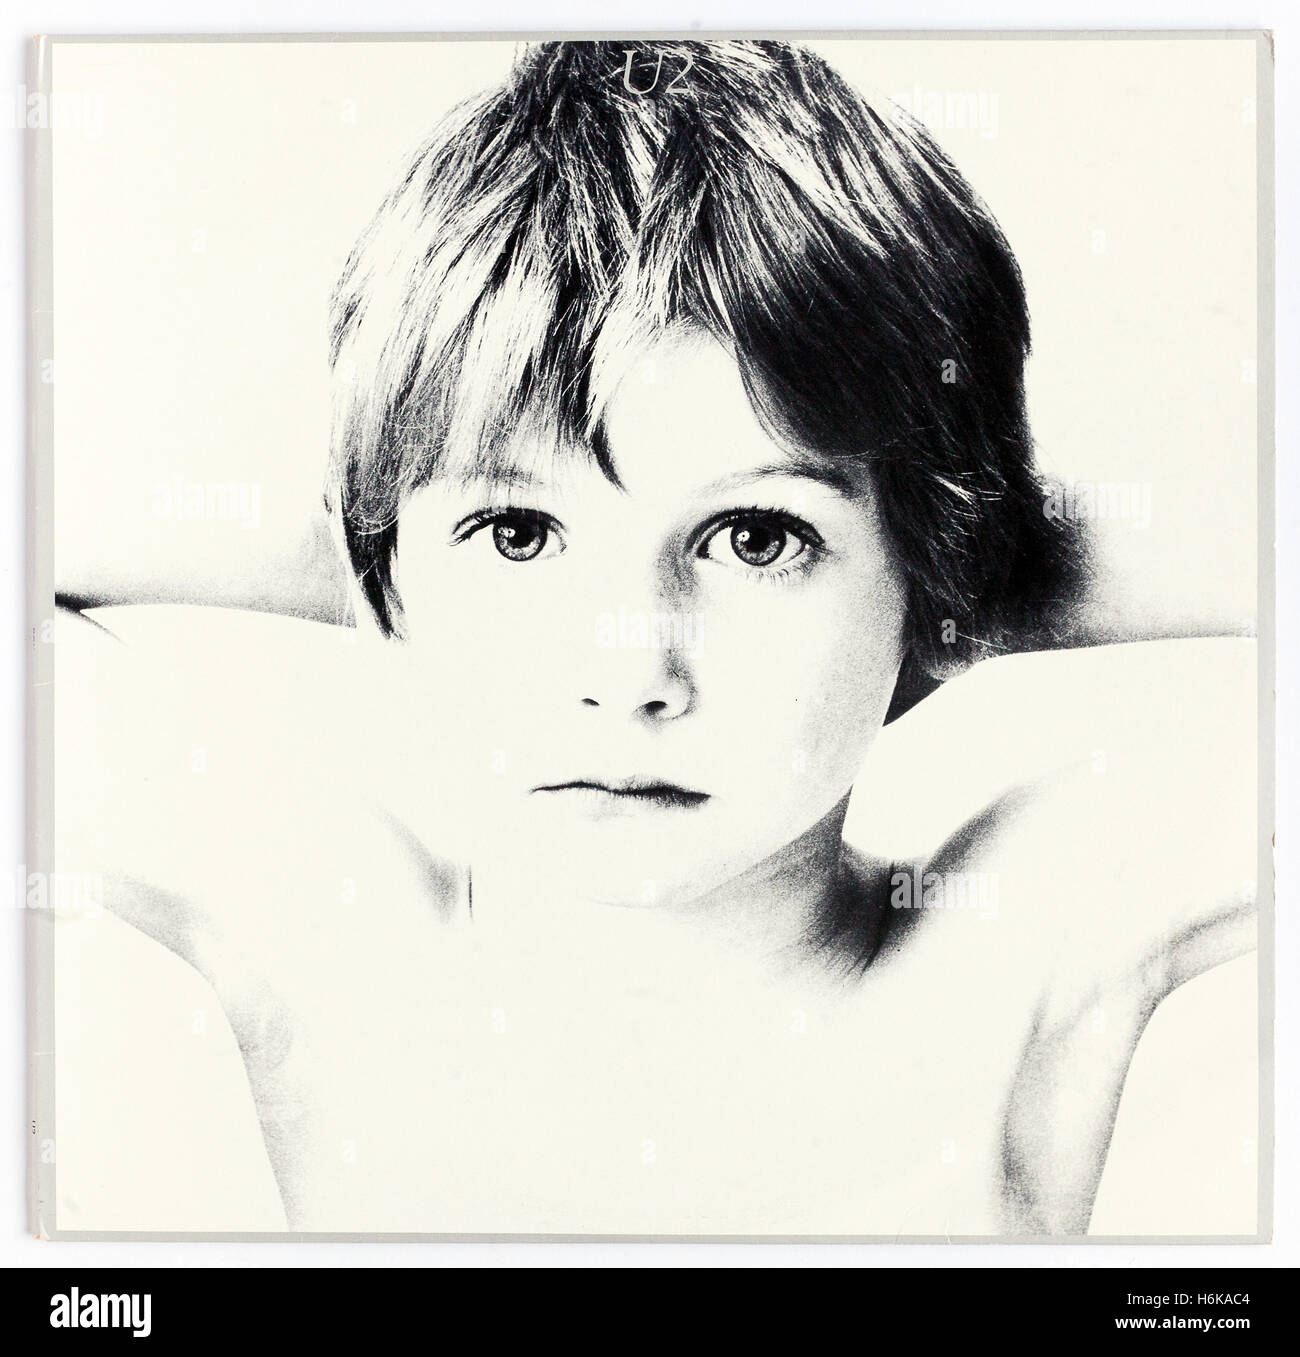 Cover of 'Boy', 1980 album by U2 on Island Records - Editorial use only Stock Photo